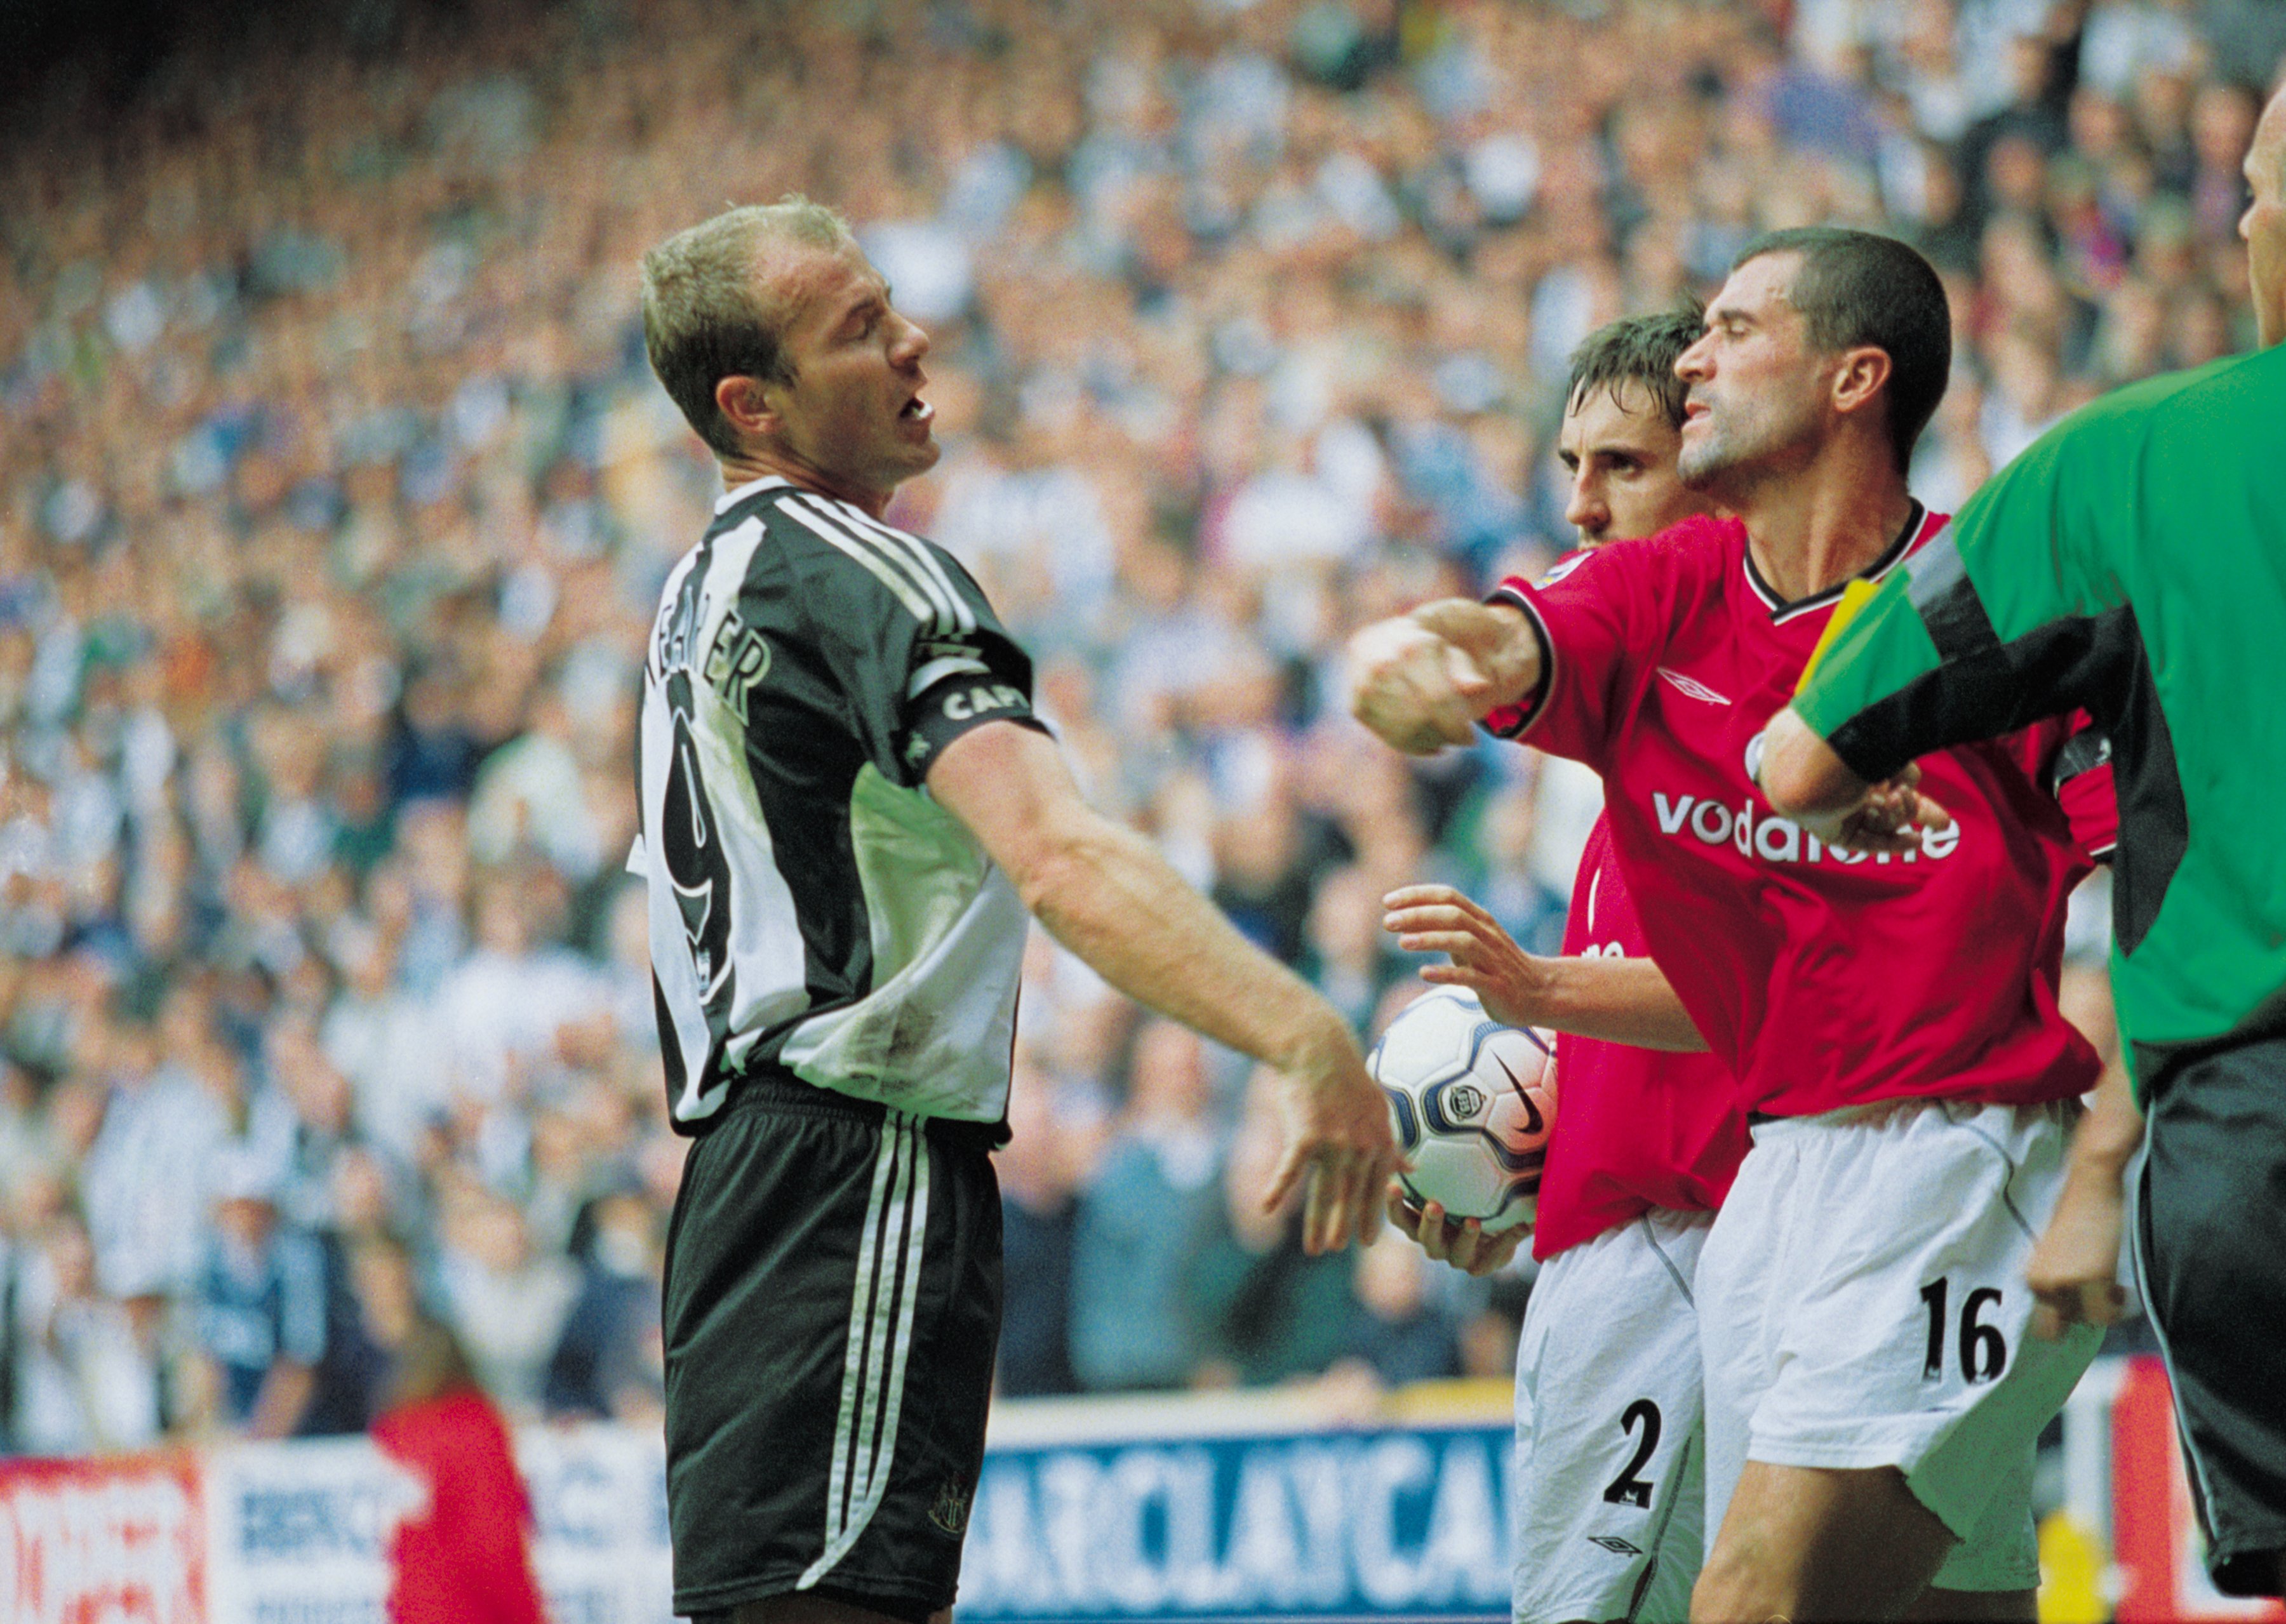 15 Sep 2001:  Man Utd Captain Roy Keane takes a swing at Newcastle captain Alan Shearer during the FA Barclaycard Premiership match between Newcastle United and Manchester United played at St. James Park in Newcastle, England.  Newcastle won the match 4-